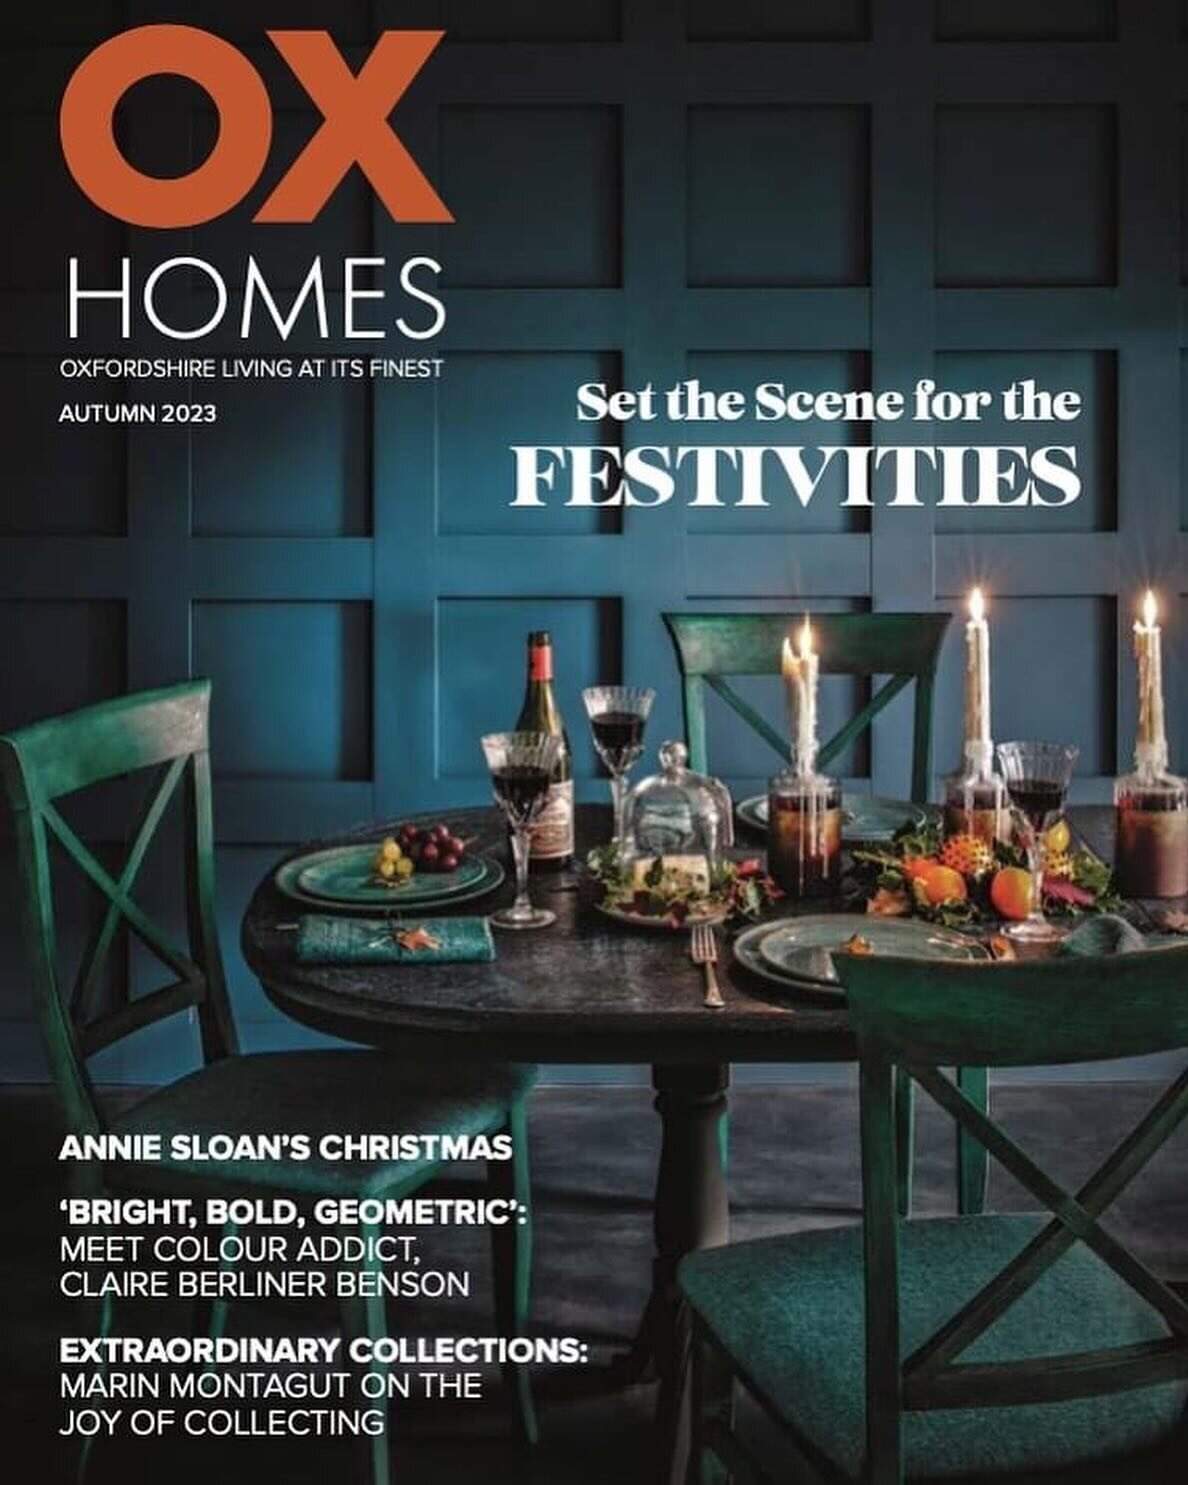 Excited and honoured to be featured in OX HOMES magazine's Autumn edition - out today!
Links in bio, and below:

https://library.myebook.com/FYNE/ox-homes-autumn-2023/5130/#page/56

https://www.oxmag.co.uk/living/

www.claireberlinerbenson.com